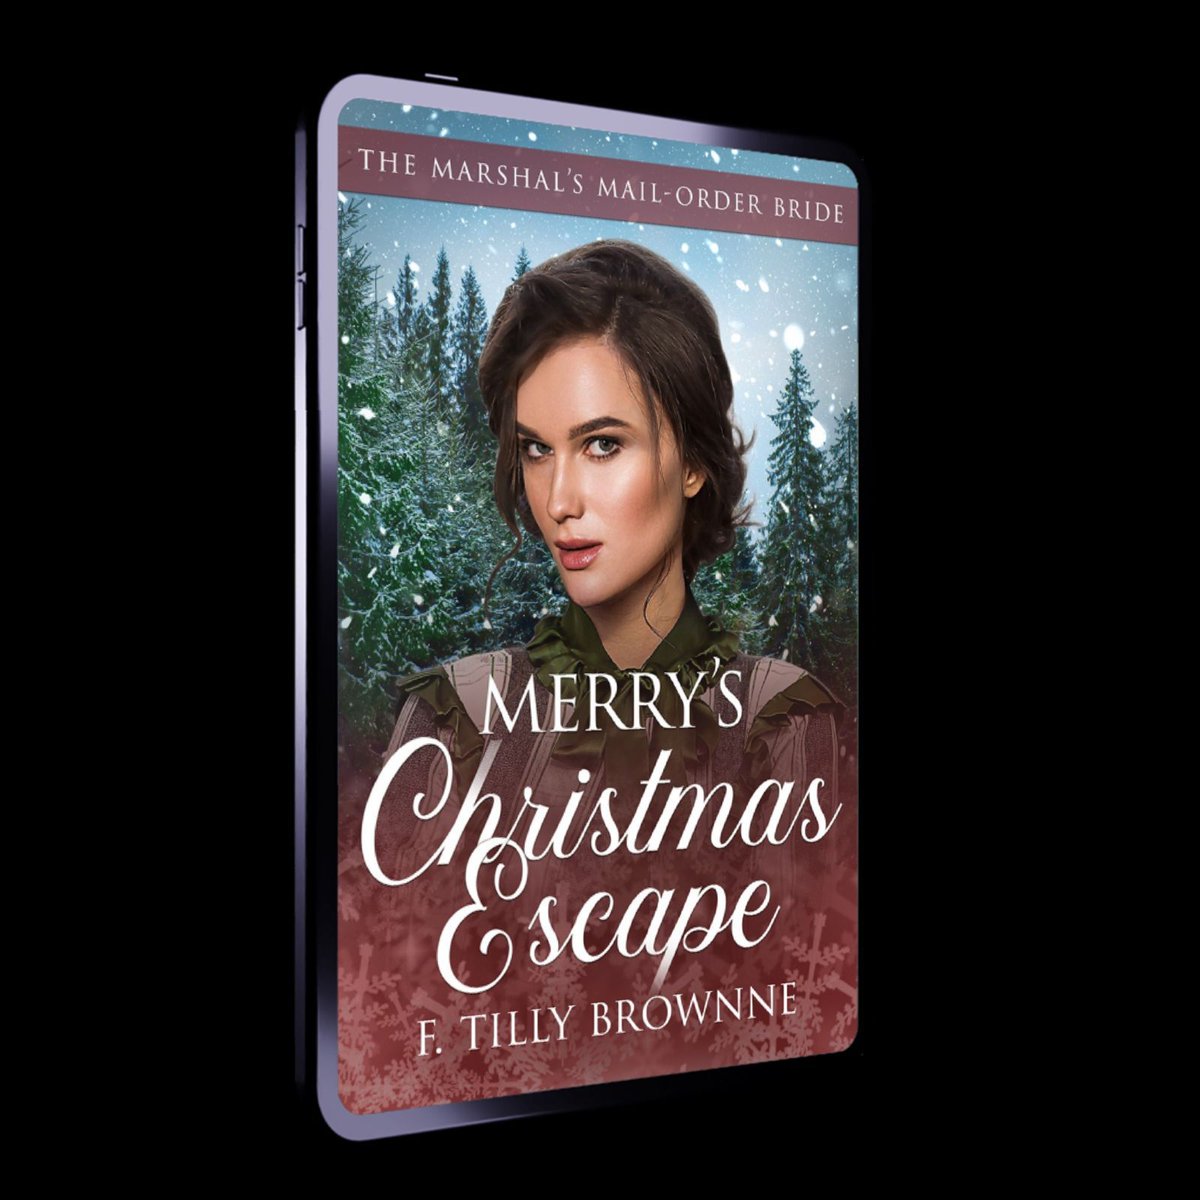 OUT NOW! She helped others escape to freedom. Because of that, now her own is threatened. Can the Marshal help her find freedom? Merry’s Christmas Escape: The Marshal’s Mail-Order Bride Book 8 #Kindle #ku buff.ly/3Ox3dXp #HistoricalRomance #IARTG